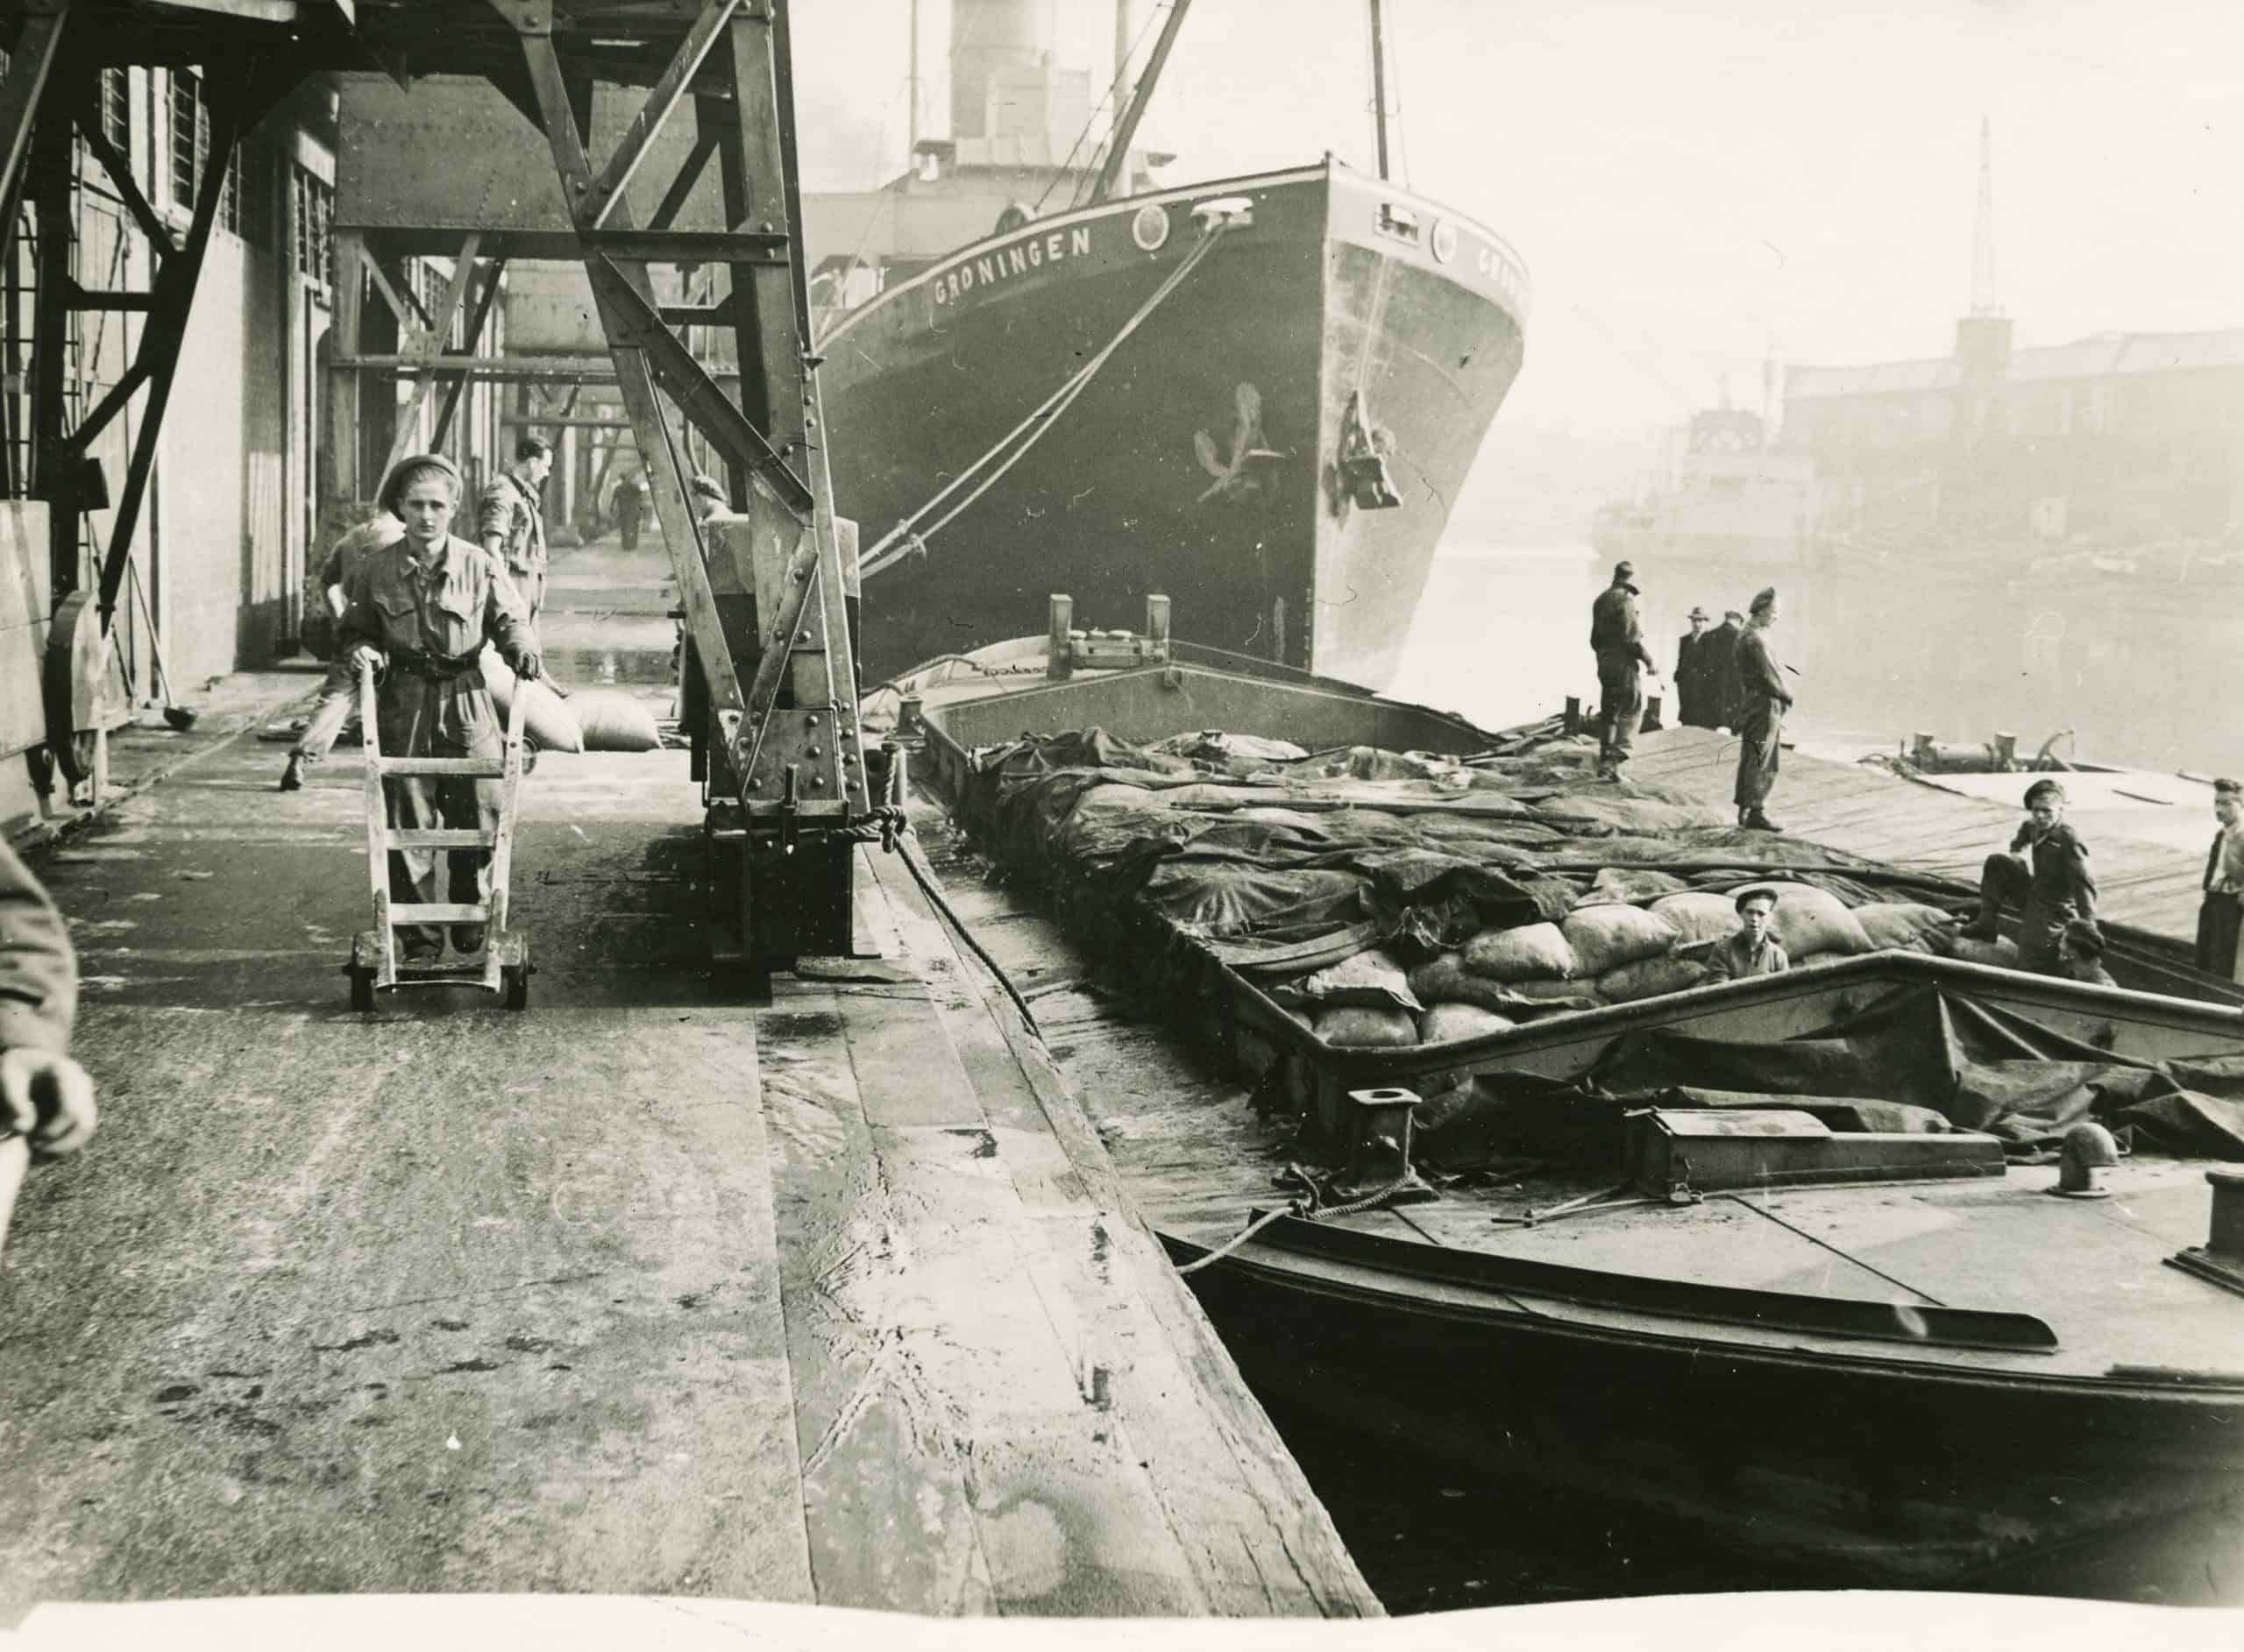 During a dock strike, millitary labour was called in to unload essential supplies. A grass-roots strike in October 1945 was not backed by union officials but port workers who had supported the war effort were determined to improve their working lives.